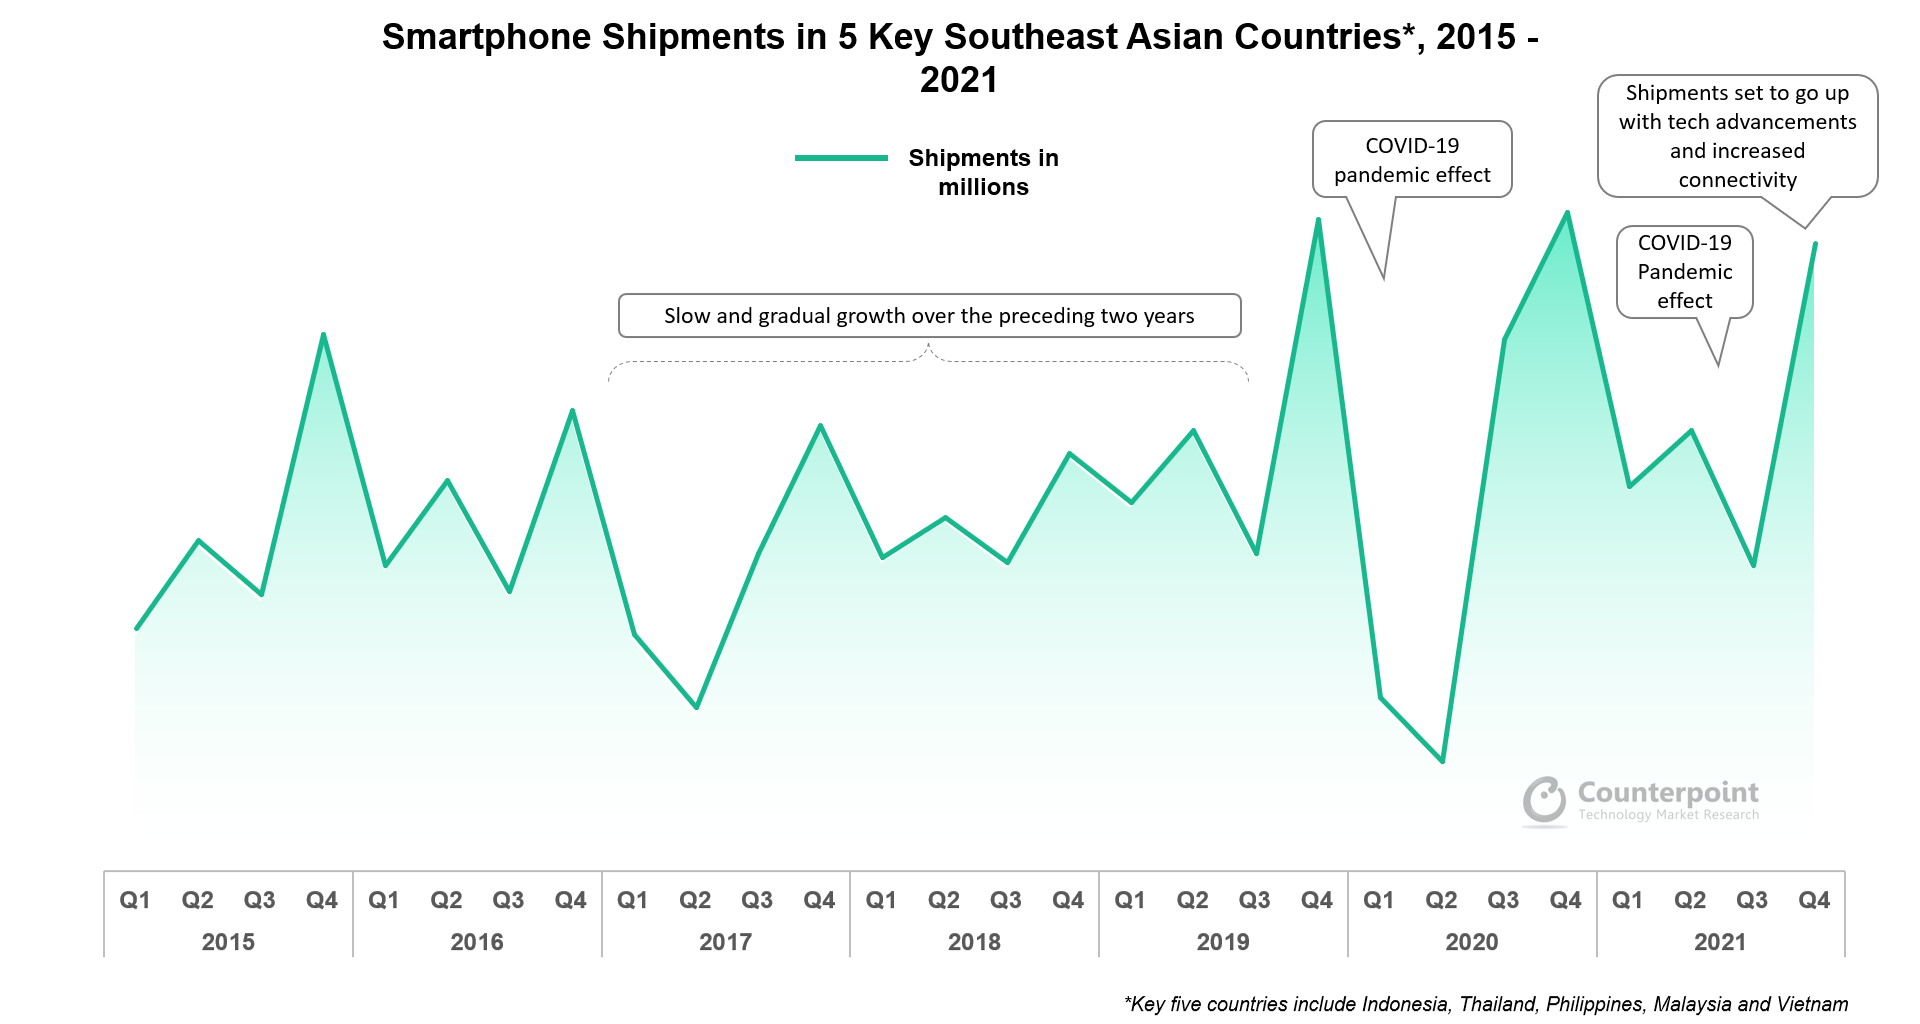 Counterpoint Research Smartphone Shipments in 5 Key Southeast Asian Countries 2015-2021